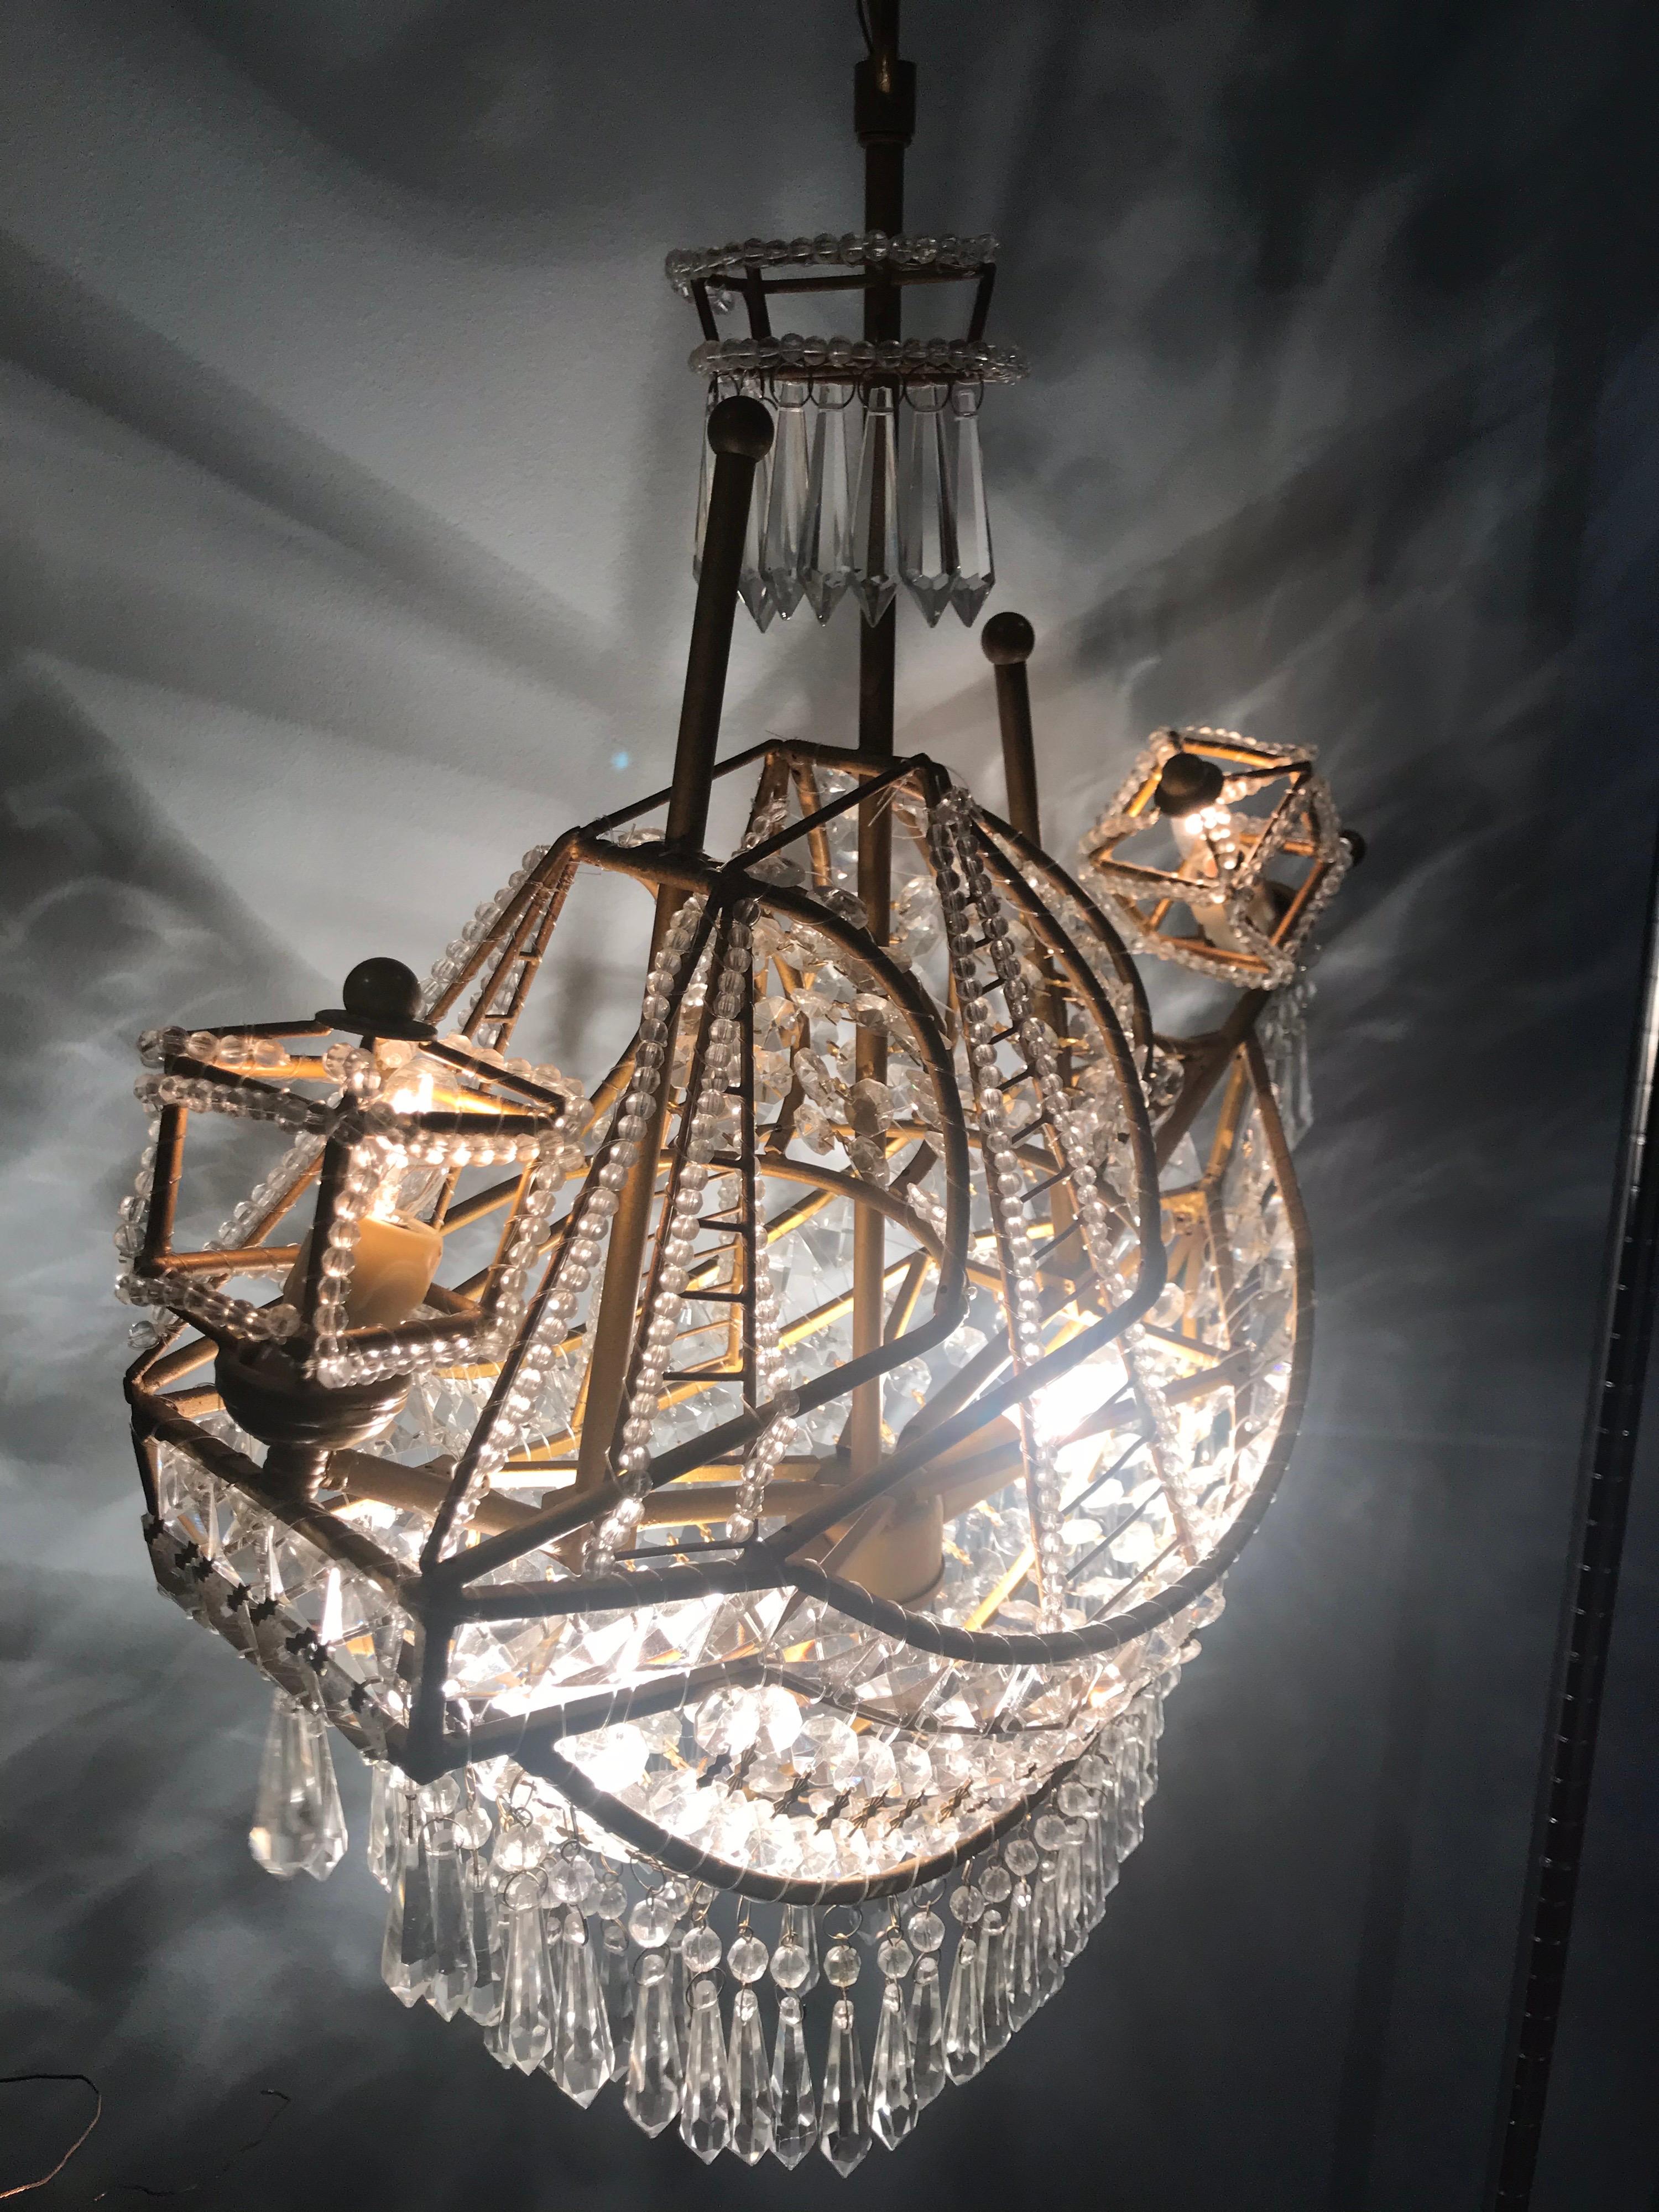 Painted Crystal Ship Chandelier